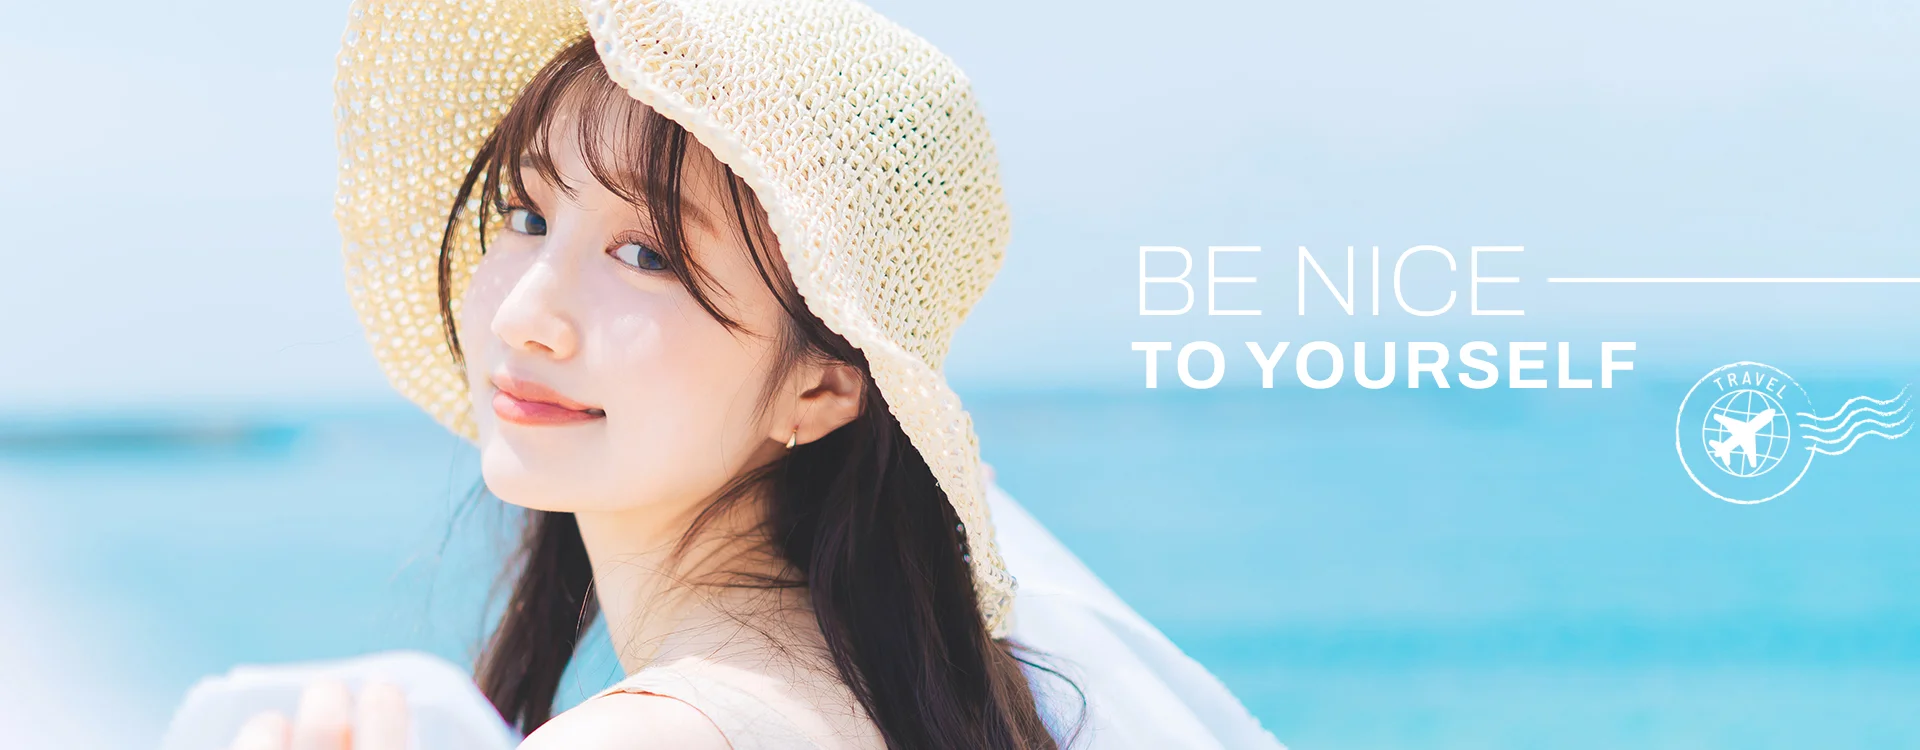 Overseas Banner - Be nice to your self